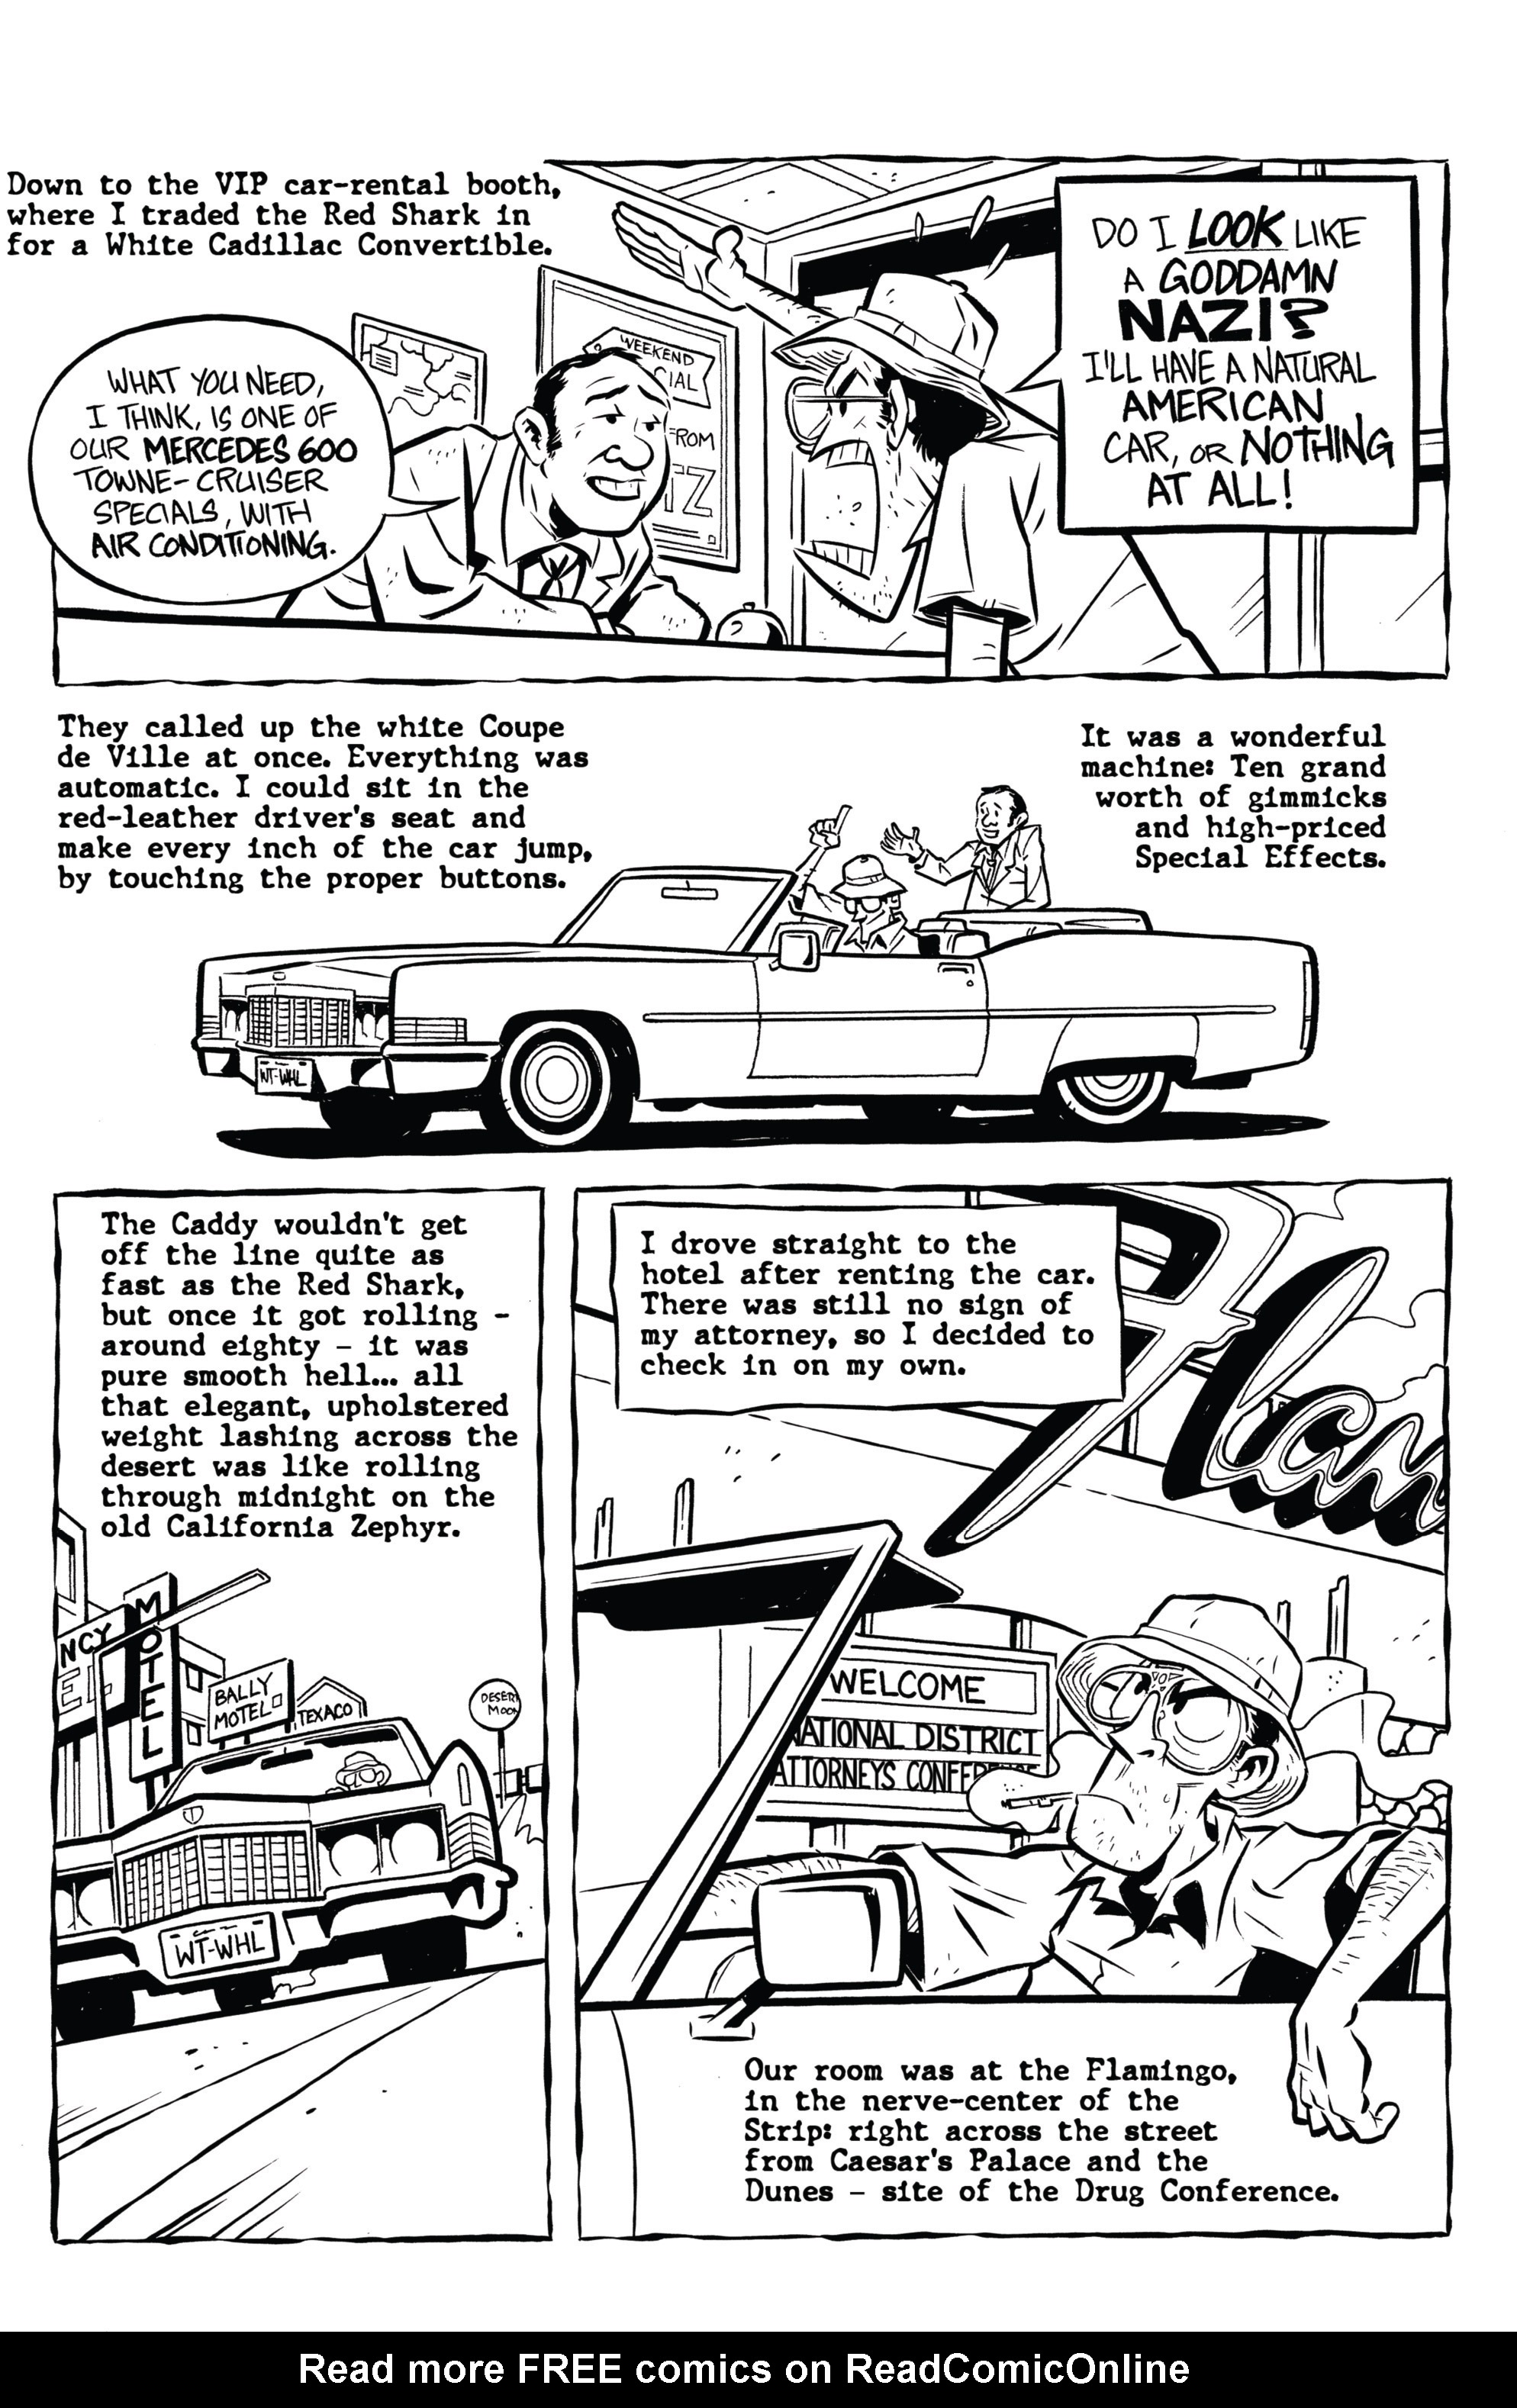 Read online Hunter S. Thompson's Fear and Loathing in Las Vegas comic -  Issue #3 - 17